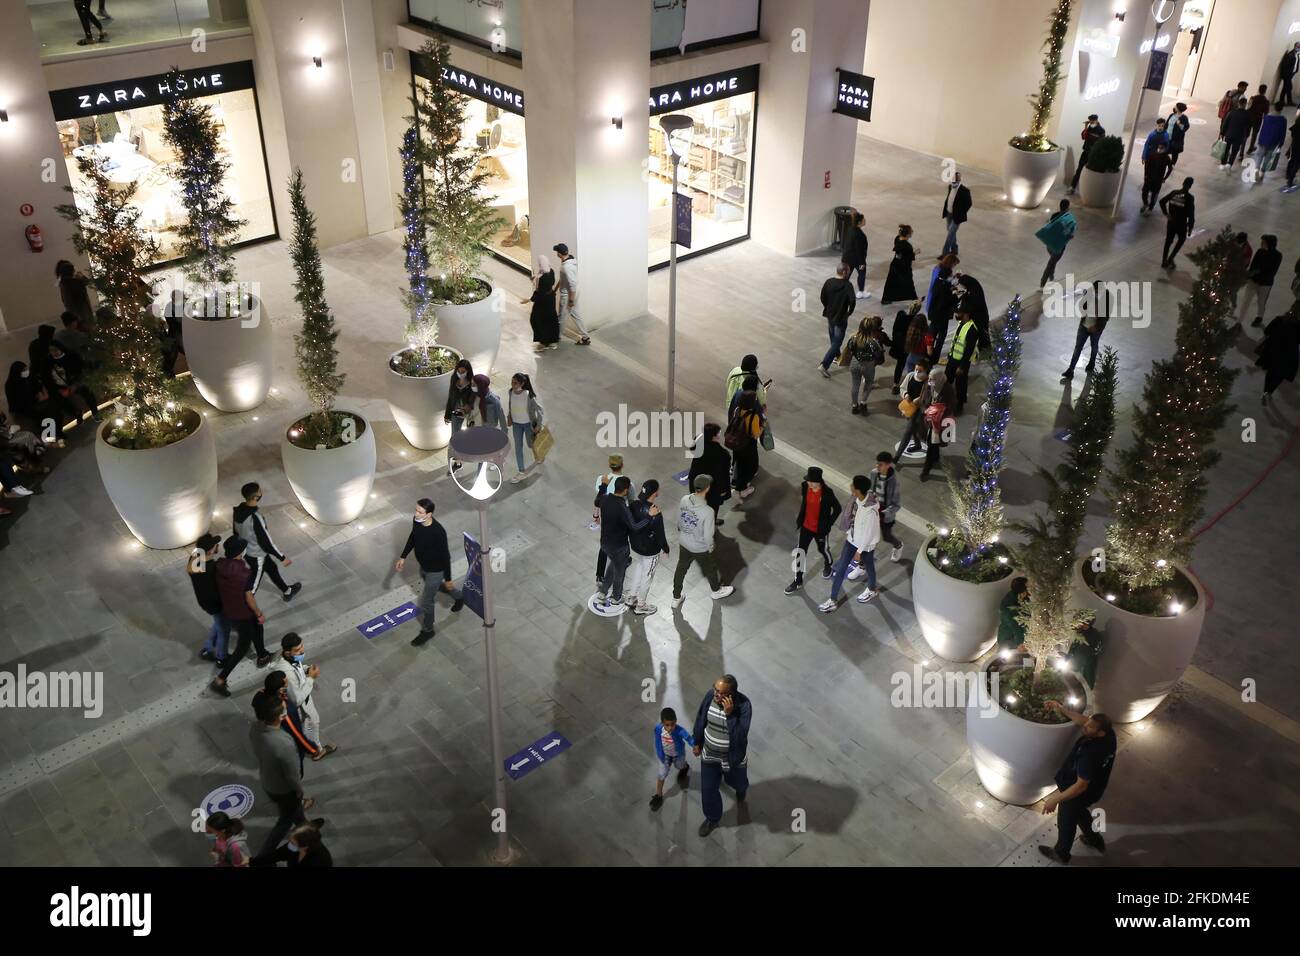 Algiers. 1st May, 2021. People walk in a shopping center in Algiers, Algeria,  April 29, 2021. The Algerian government announced on Thursday a series of  measures to curb the spread of COVID-19,